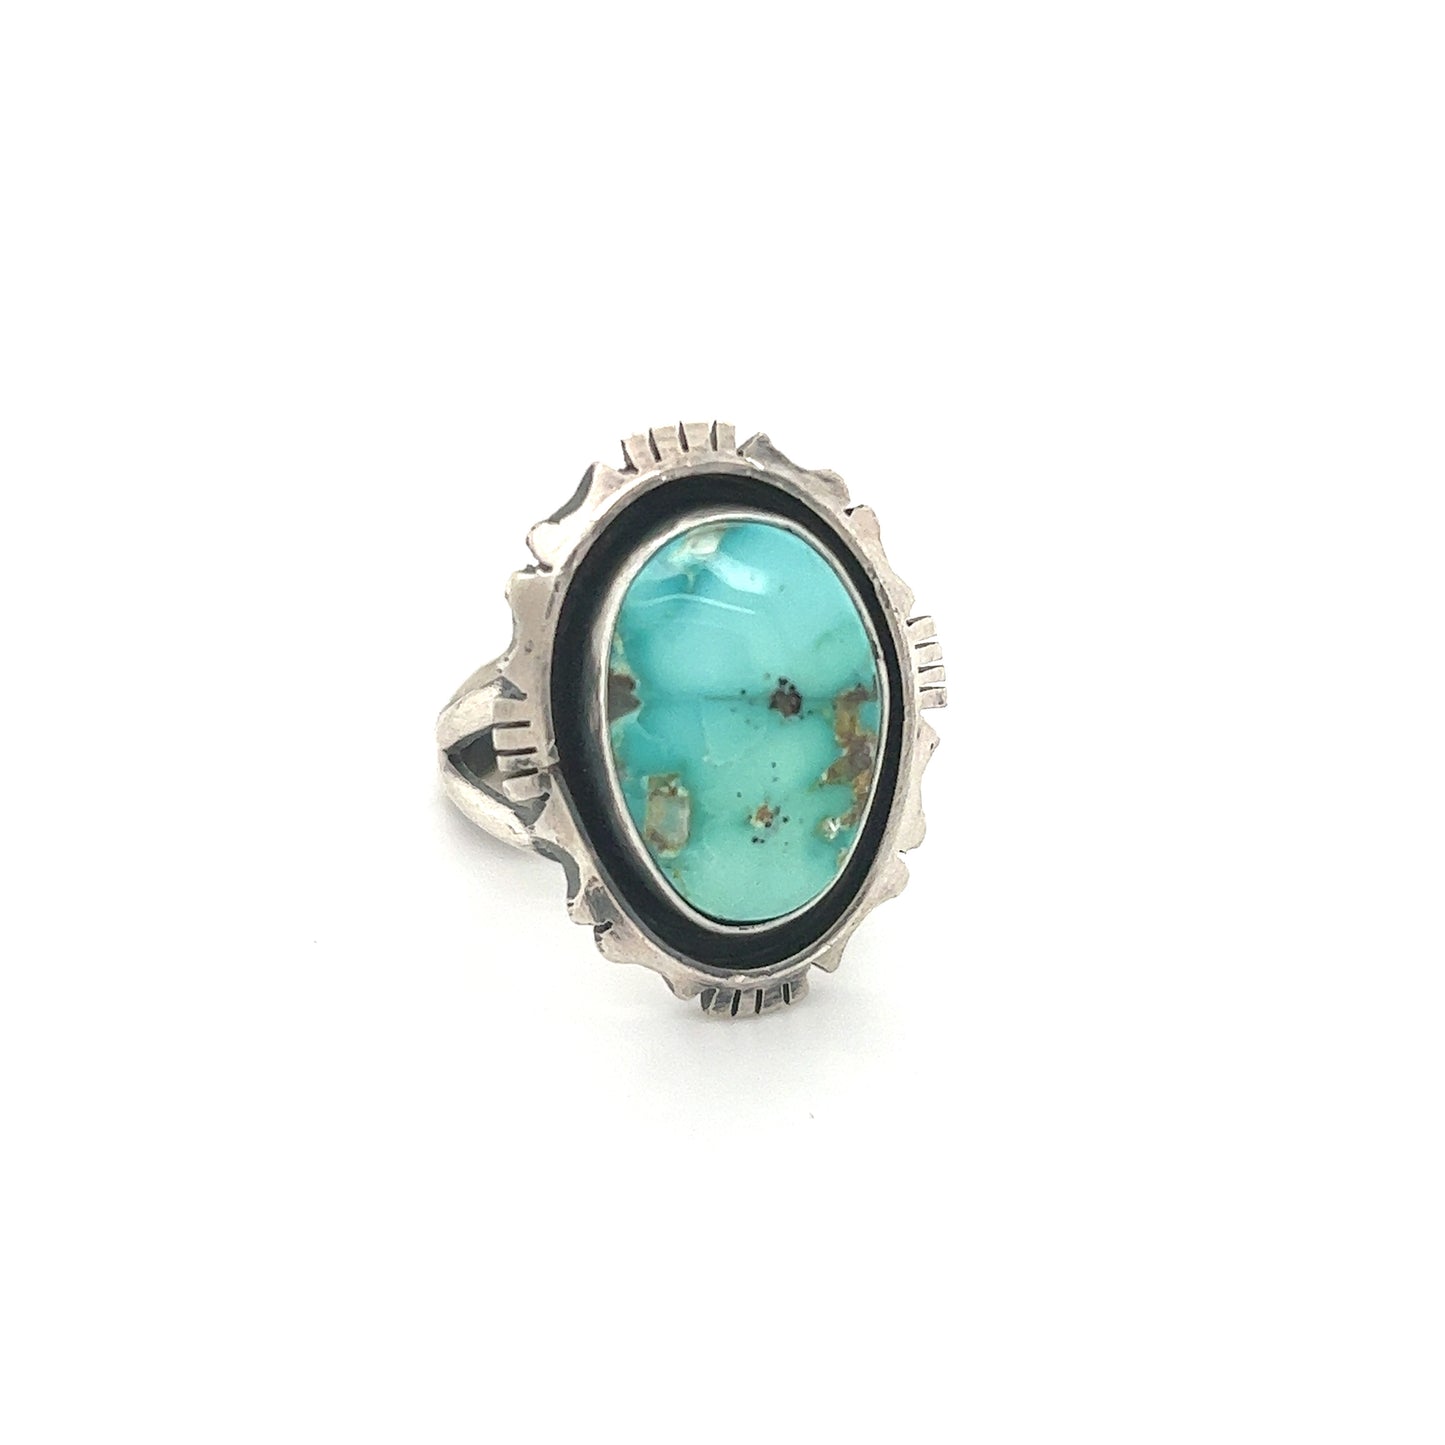 A cultural sterling silver ring with a Stunning Native American Turquoise Ring.